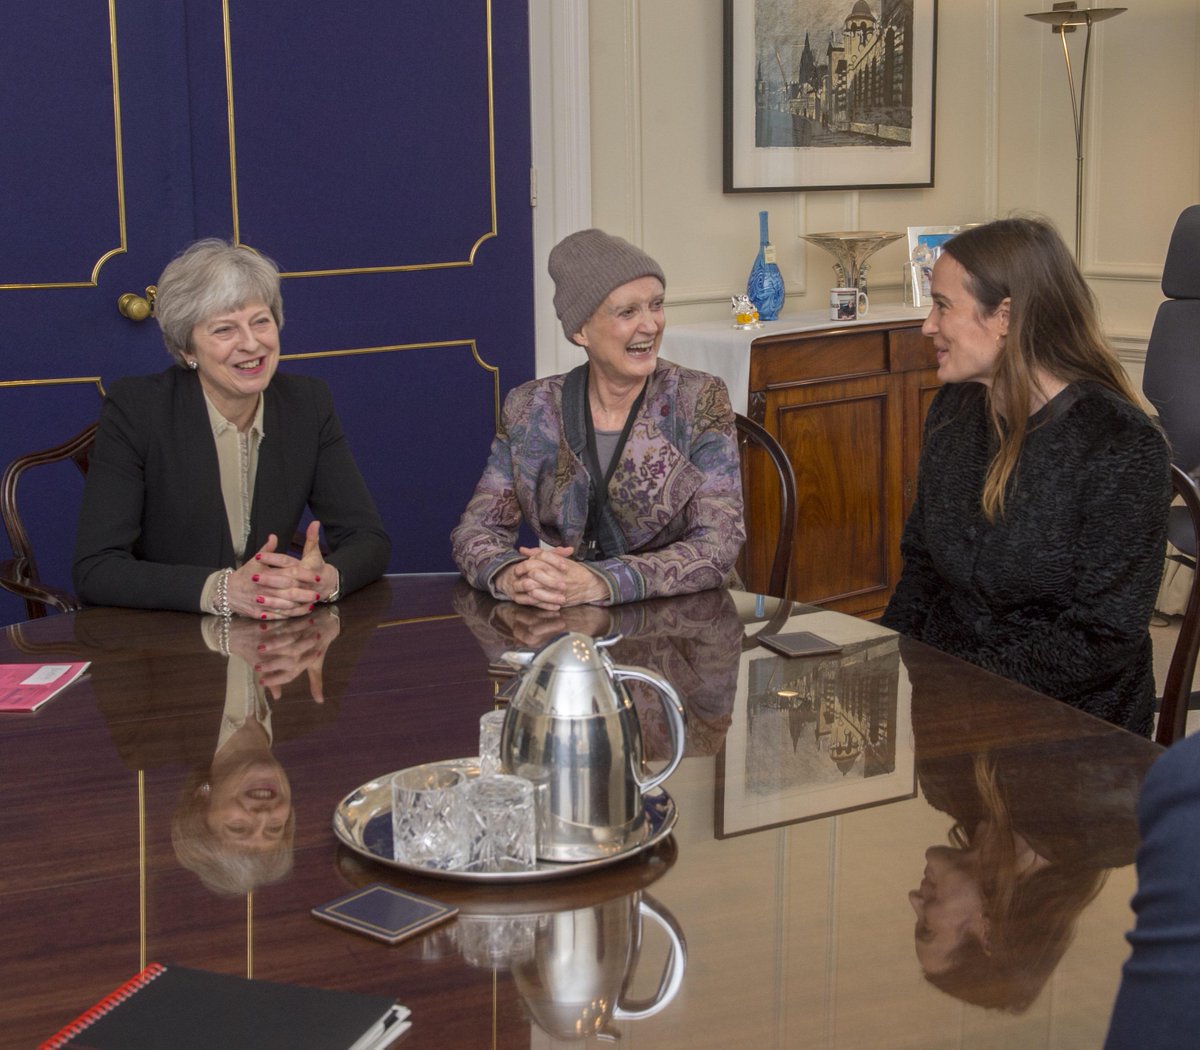 The PM today met Baroness Jowell and her family with the Health and Social Care Secretary to discuss proposals to improve brain cancer care, as @DHSCgovuk and @CR_UK announce a £45 million boost to brain tumour research to tackle a disease where survival rates remain far too low